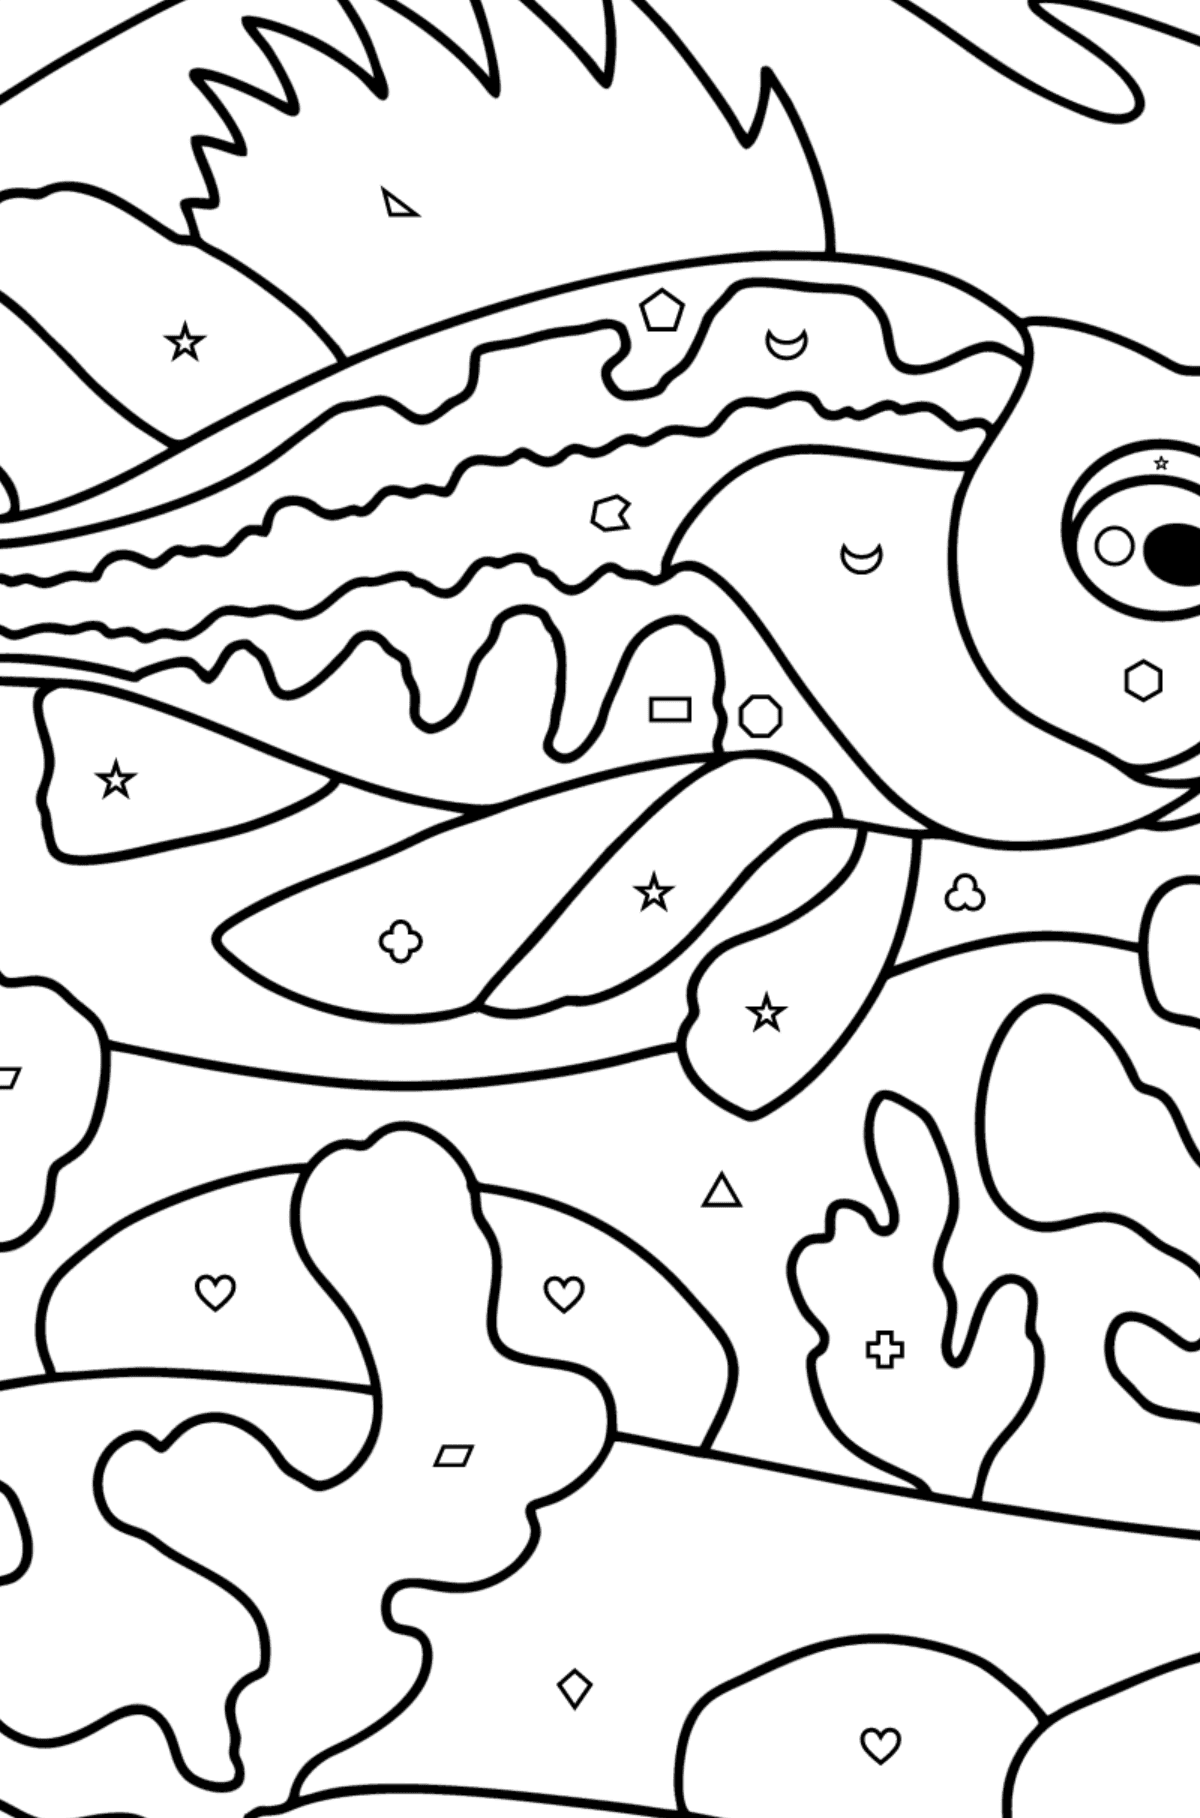 Sea bass coloring page - Coloring by Geometric Shapes for Kids